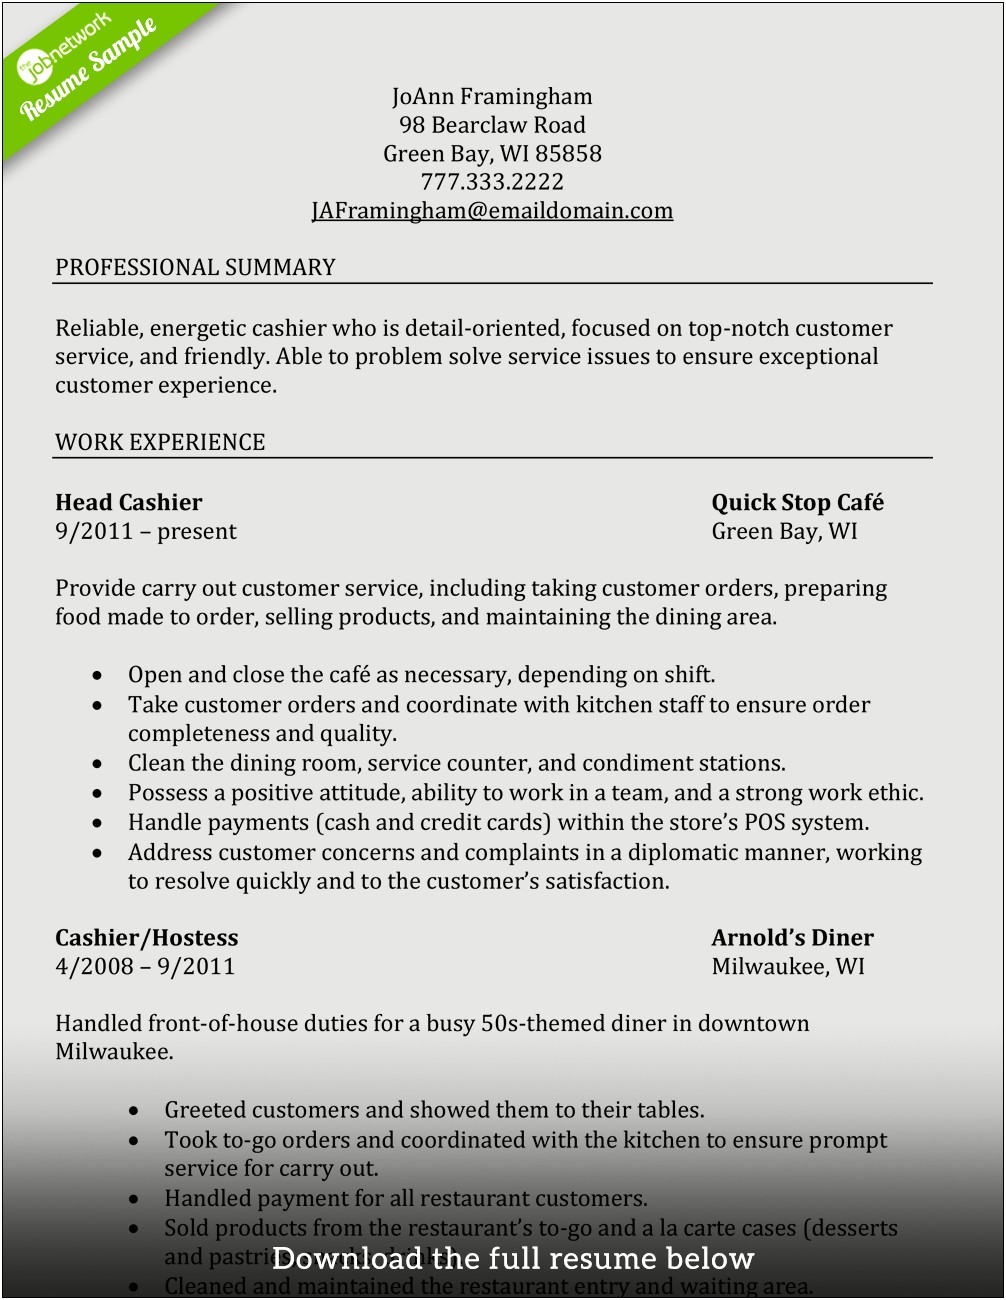 Description Of Cashier In Fastfood Duties For Resume